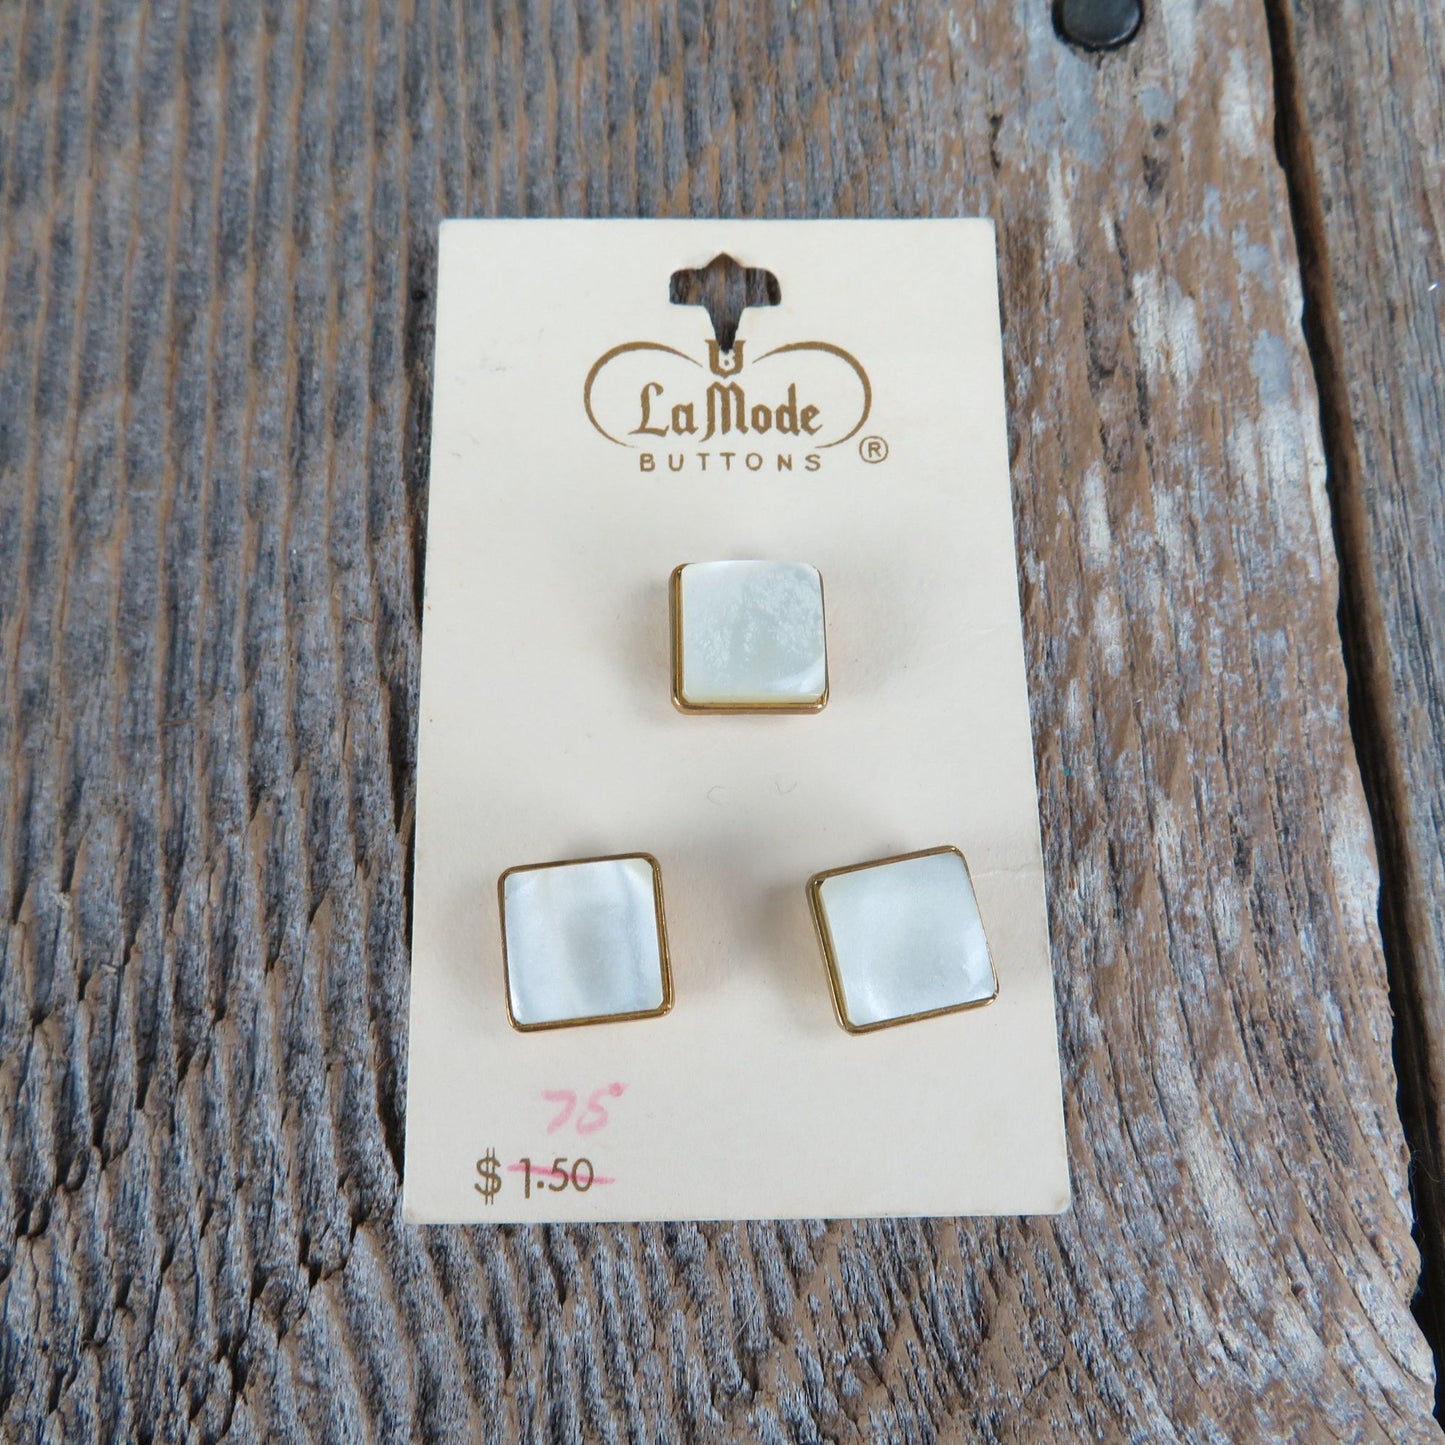 Gold and White Square Buttons La Mode Glossy Metal 5/8 inch # 35216 Japan Pearlesque